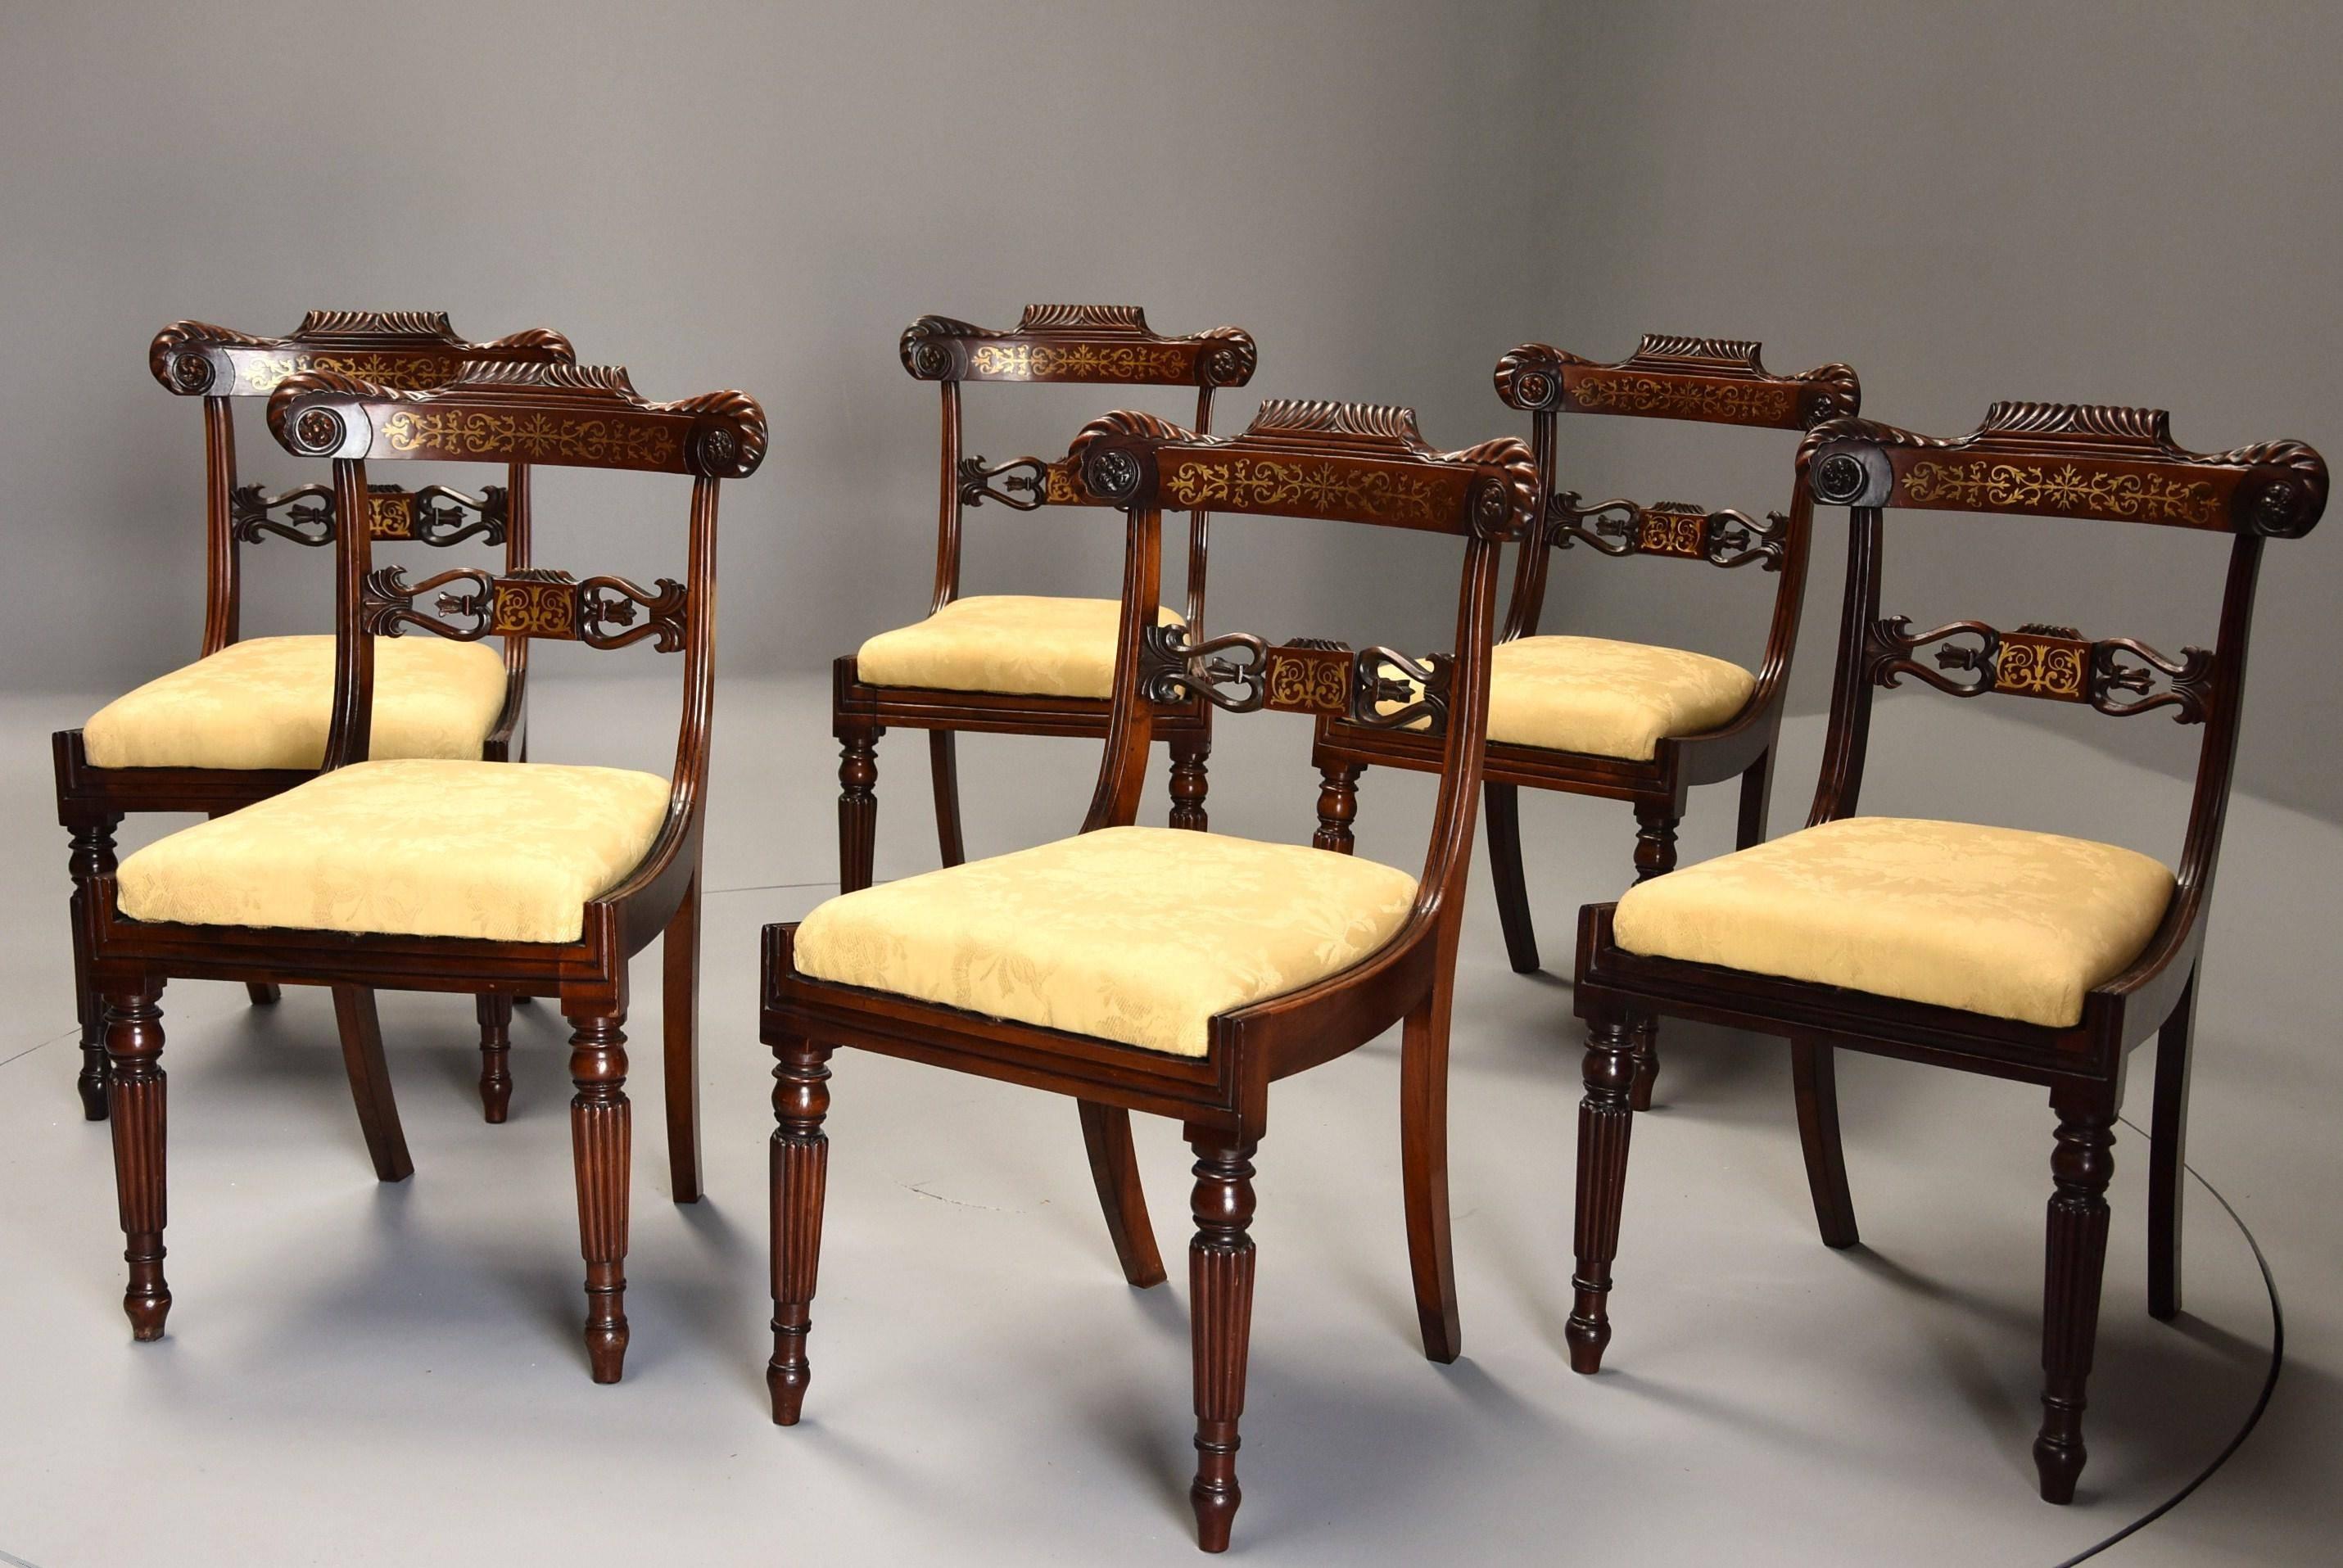 A fine quality early 19th century set of six Regency rosewood dining chairs with brass inlaid decoration.

Each chair consists of a shaped back rail with gadroon carved decoration with carved rosettes to each end with Fine quality inlaid brass